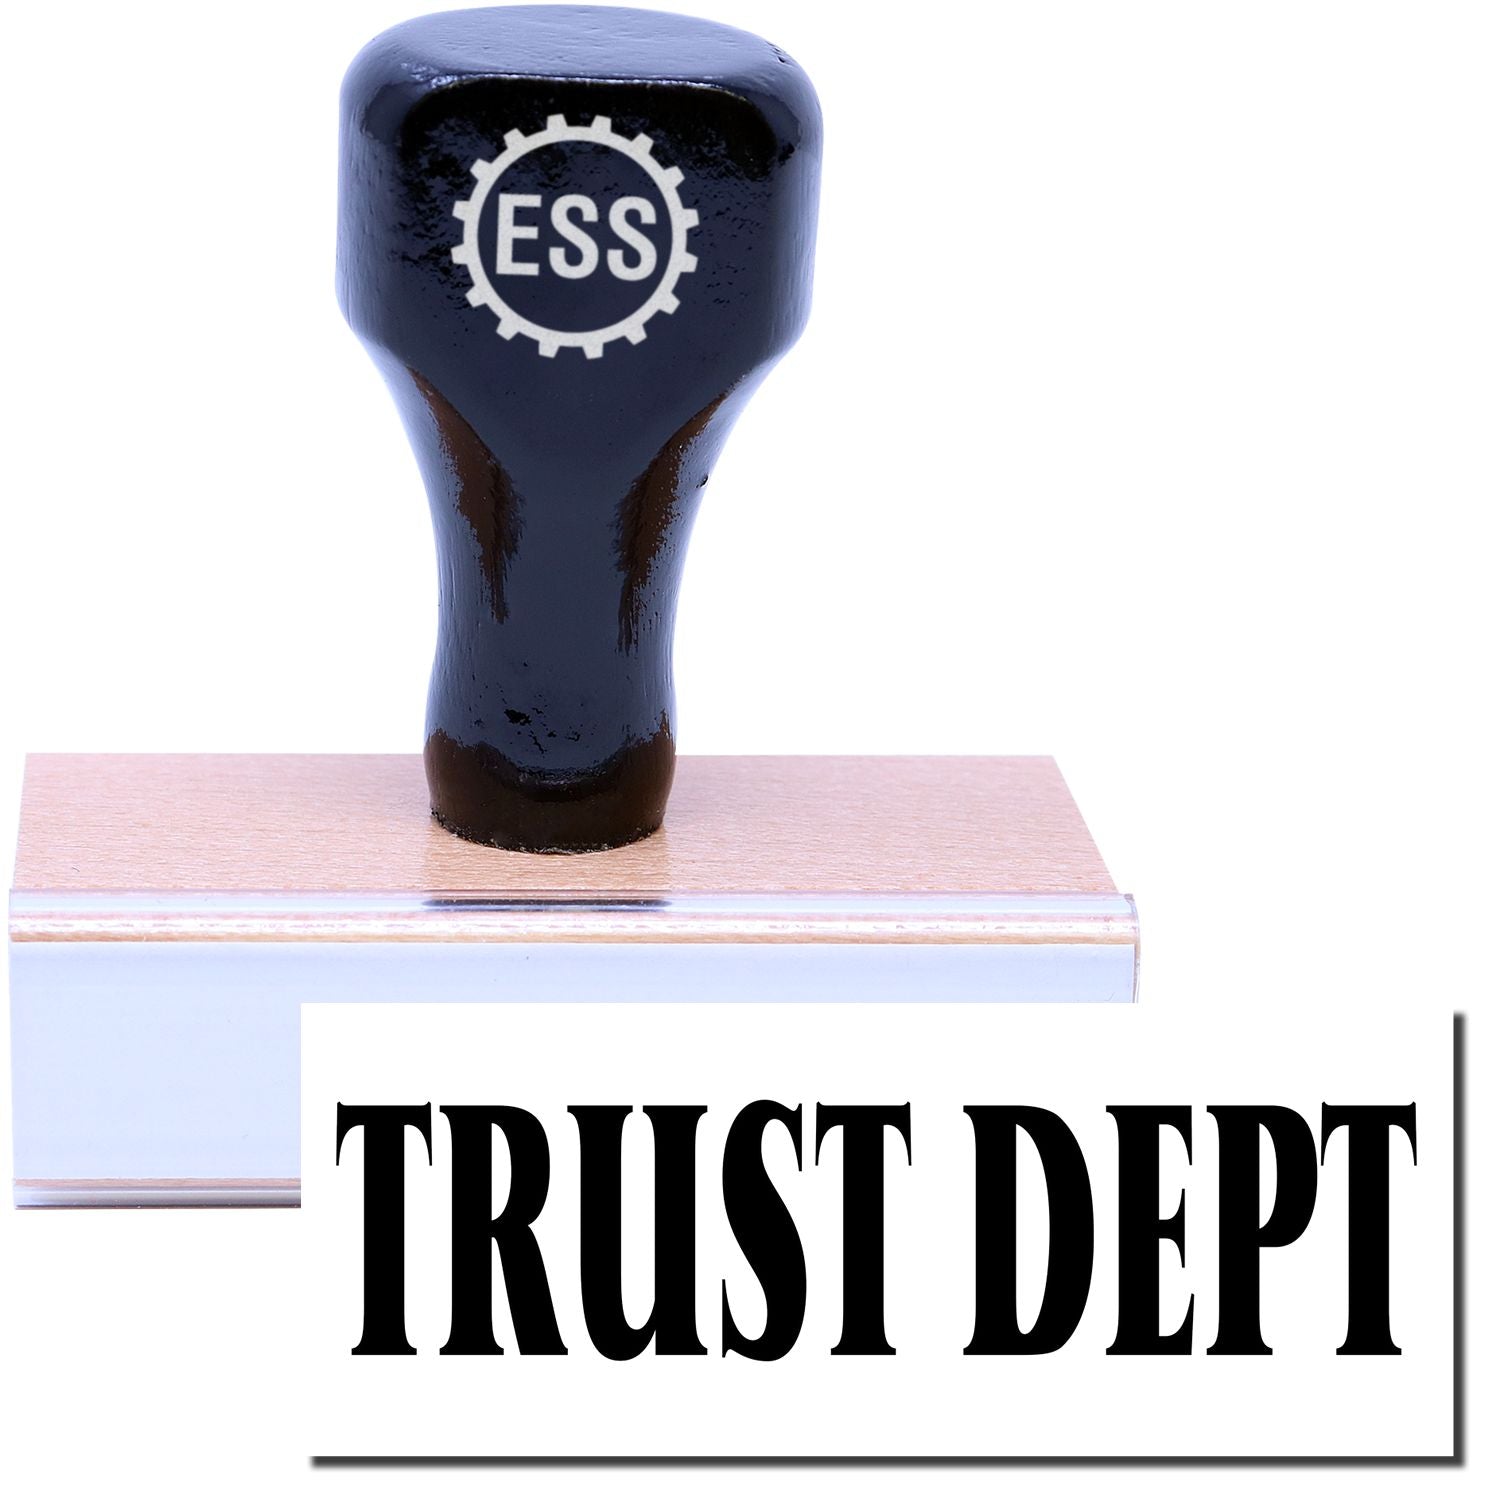 A stock office rubber stamp with a stamped image showing how the text "TRUST DEPT" in a large font is displayed after stamping.